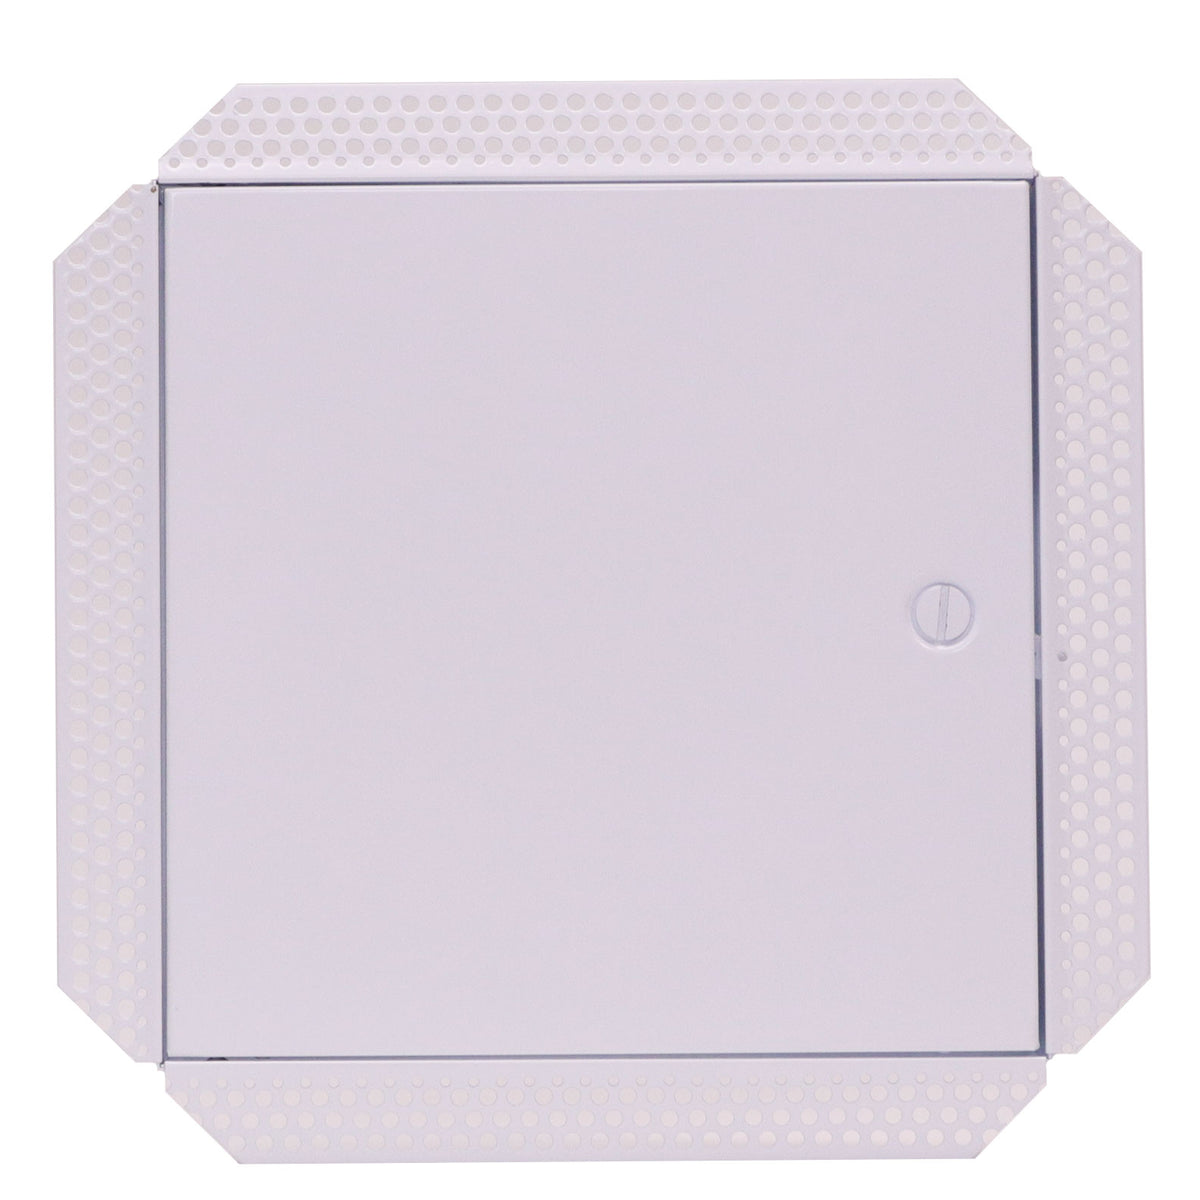 6&quot; X 6&quot; Steel Access Panel Door For Wall / Ceiling Application With Slotted Lock - [Outer Dimensions: 7&quot; Width X 7&quot; Height]